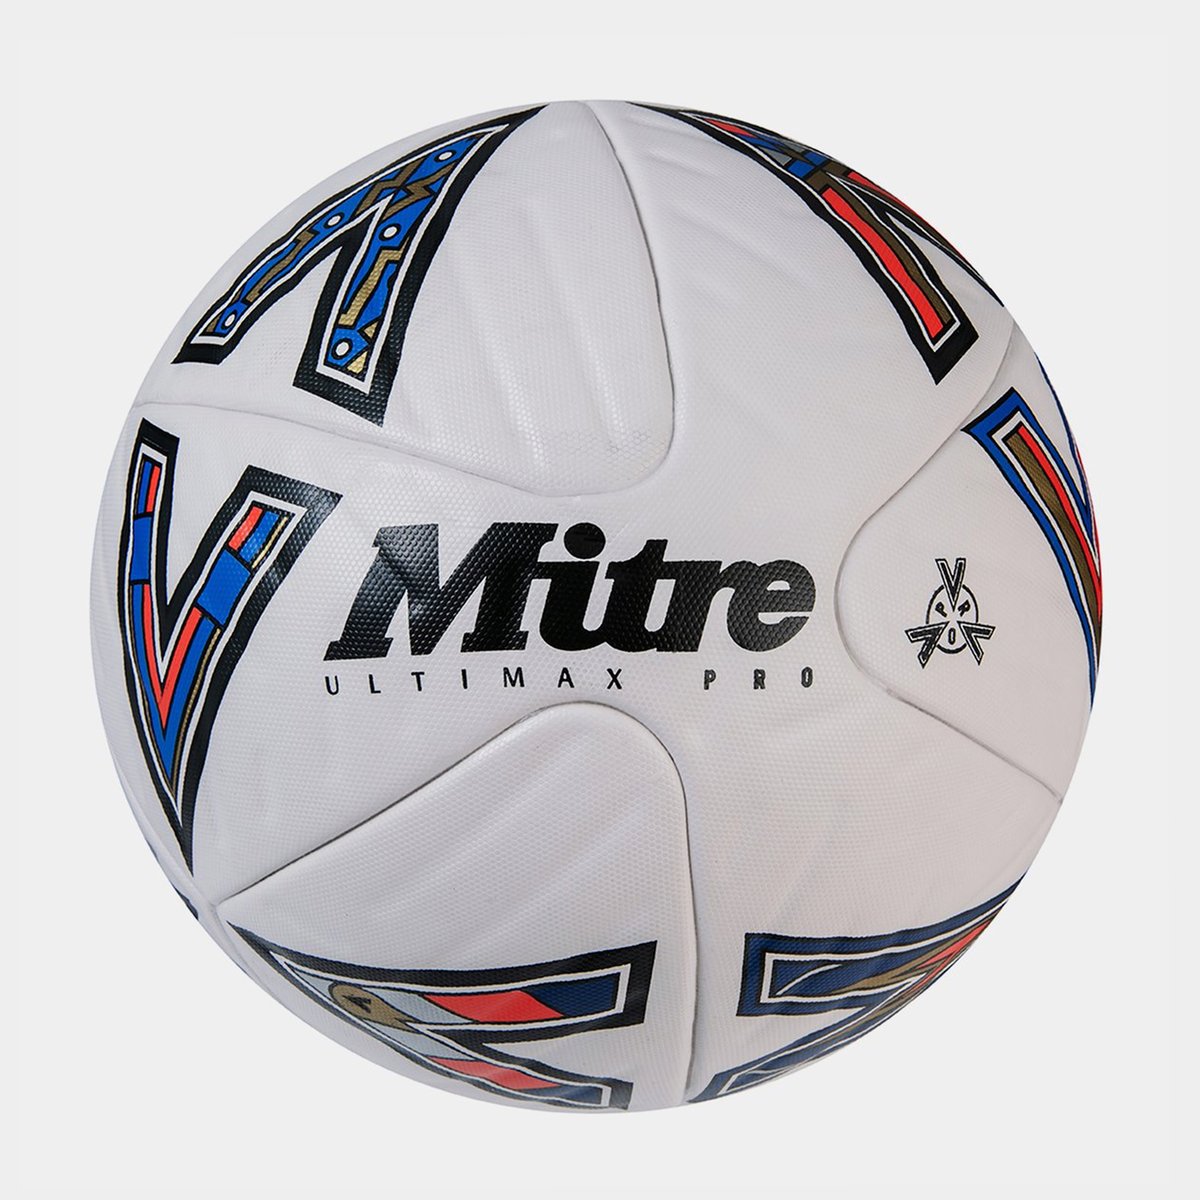 Mitre Ultimax Pro Limited Edition Football